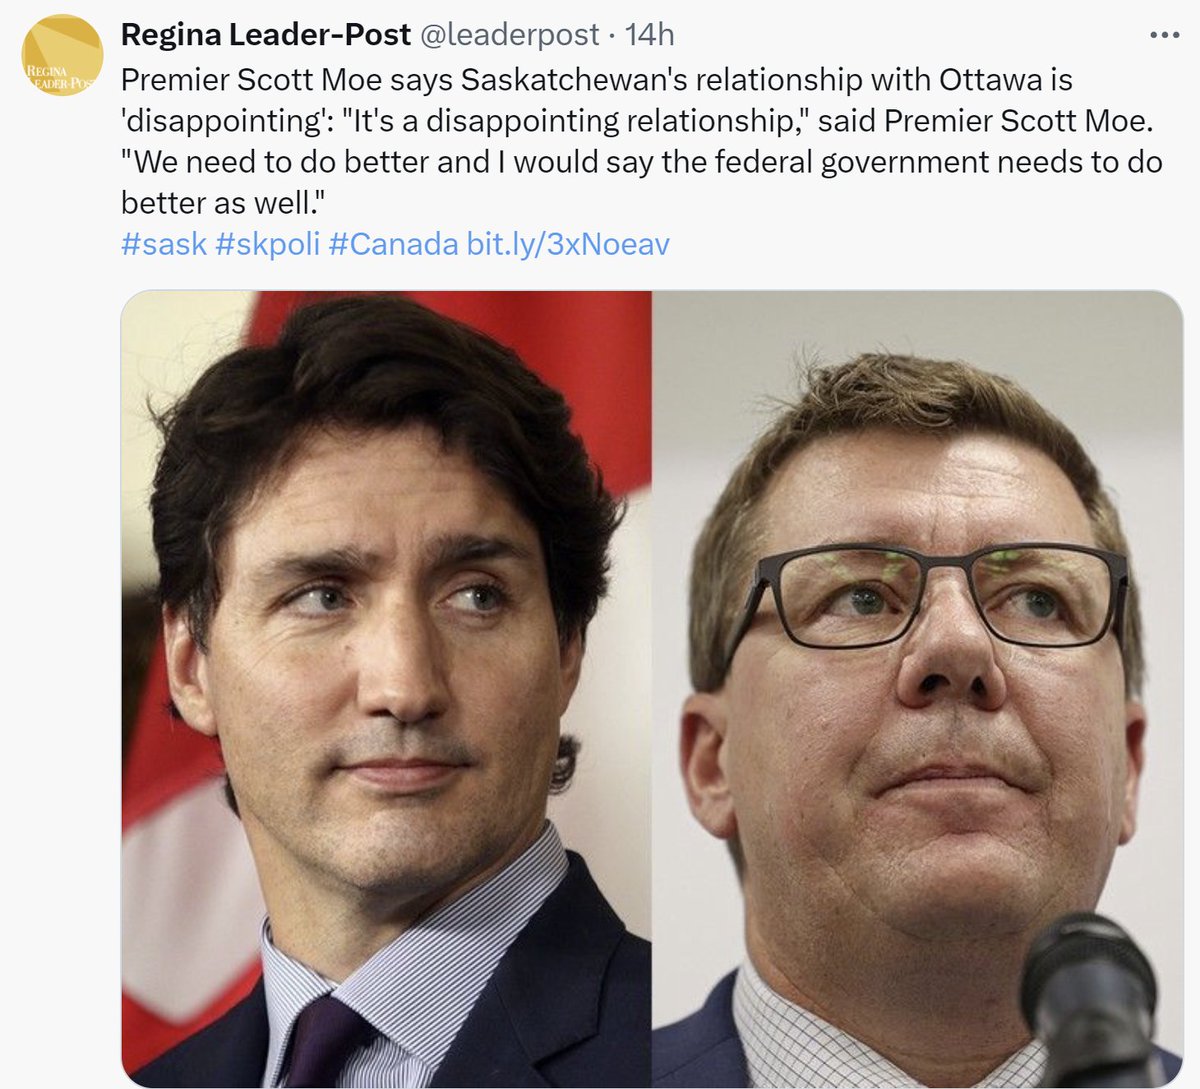 Time for BOTH @JustinTrudeau and @PremierScottMoe to put their egos aside and work towards what is best for the folks they serve. Since they are showing to be unable or unwilling it's time for change. We will be ready. #skpoli #Sask